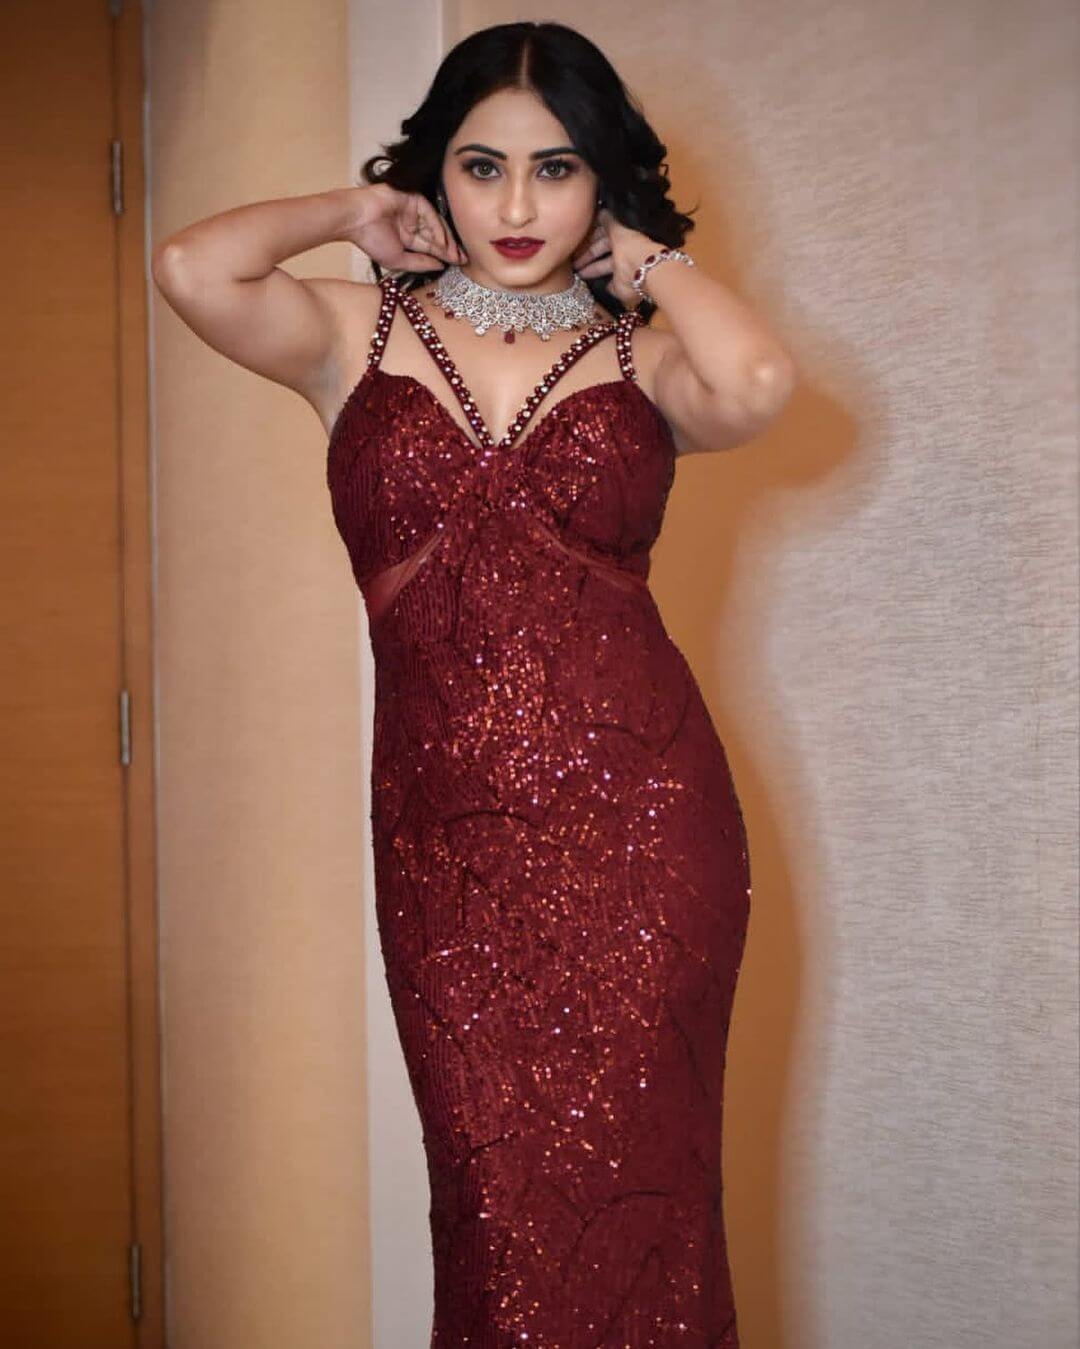 Niyati Fatnani Look Beautiful In Red Embellished Long Gown With Sexy Neckline